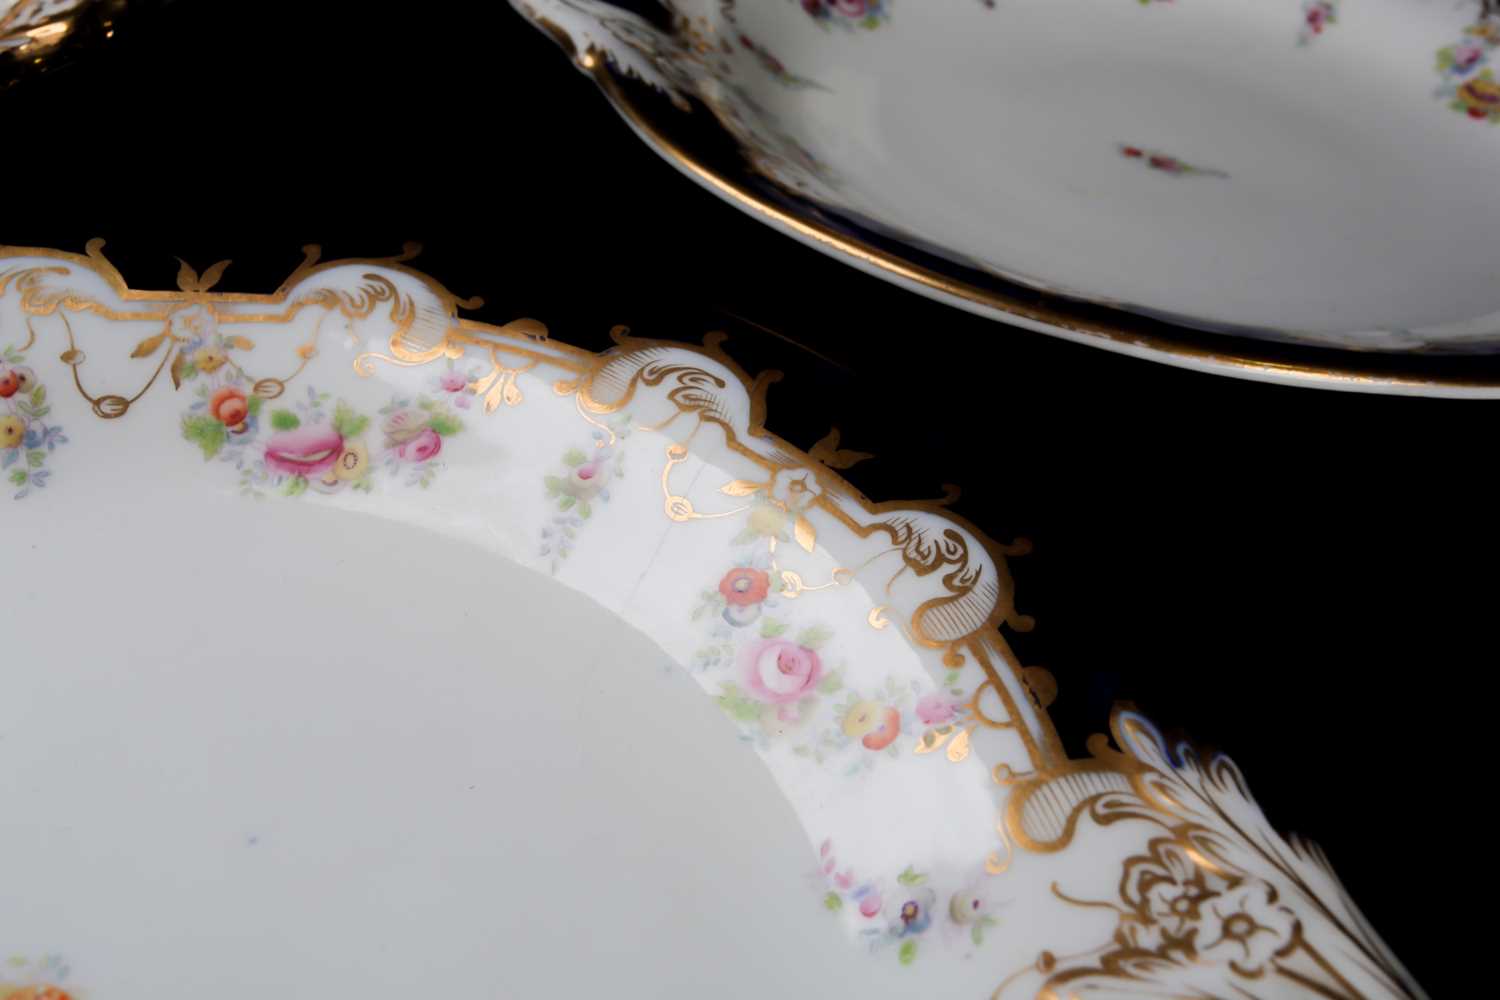 Two Meissen porcelain cabinet plates, 20th century, each with floral sprays and moulded rococo style - Image 4 of 7